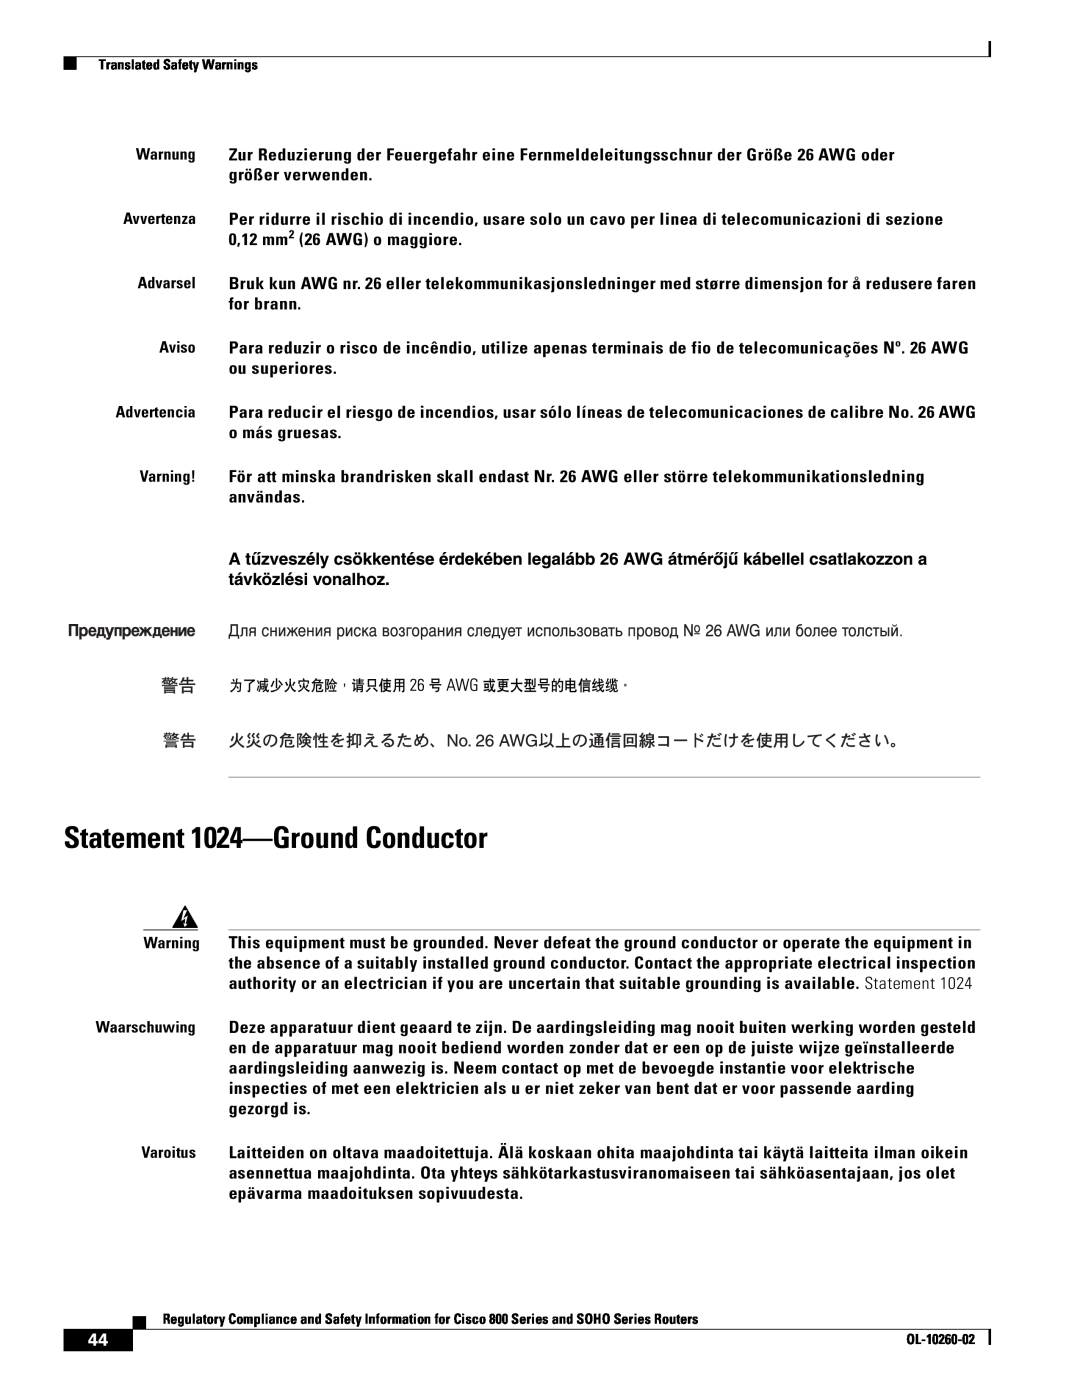 Cisco Systems SOHO Series manual Statement 1024-Ground Conductor 